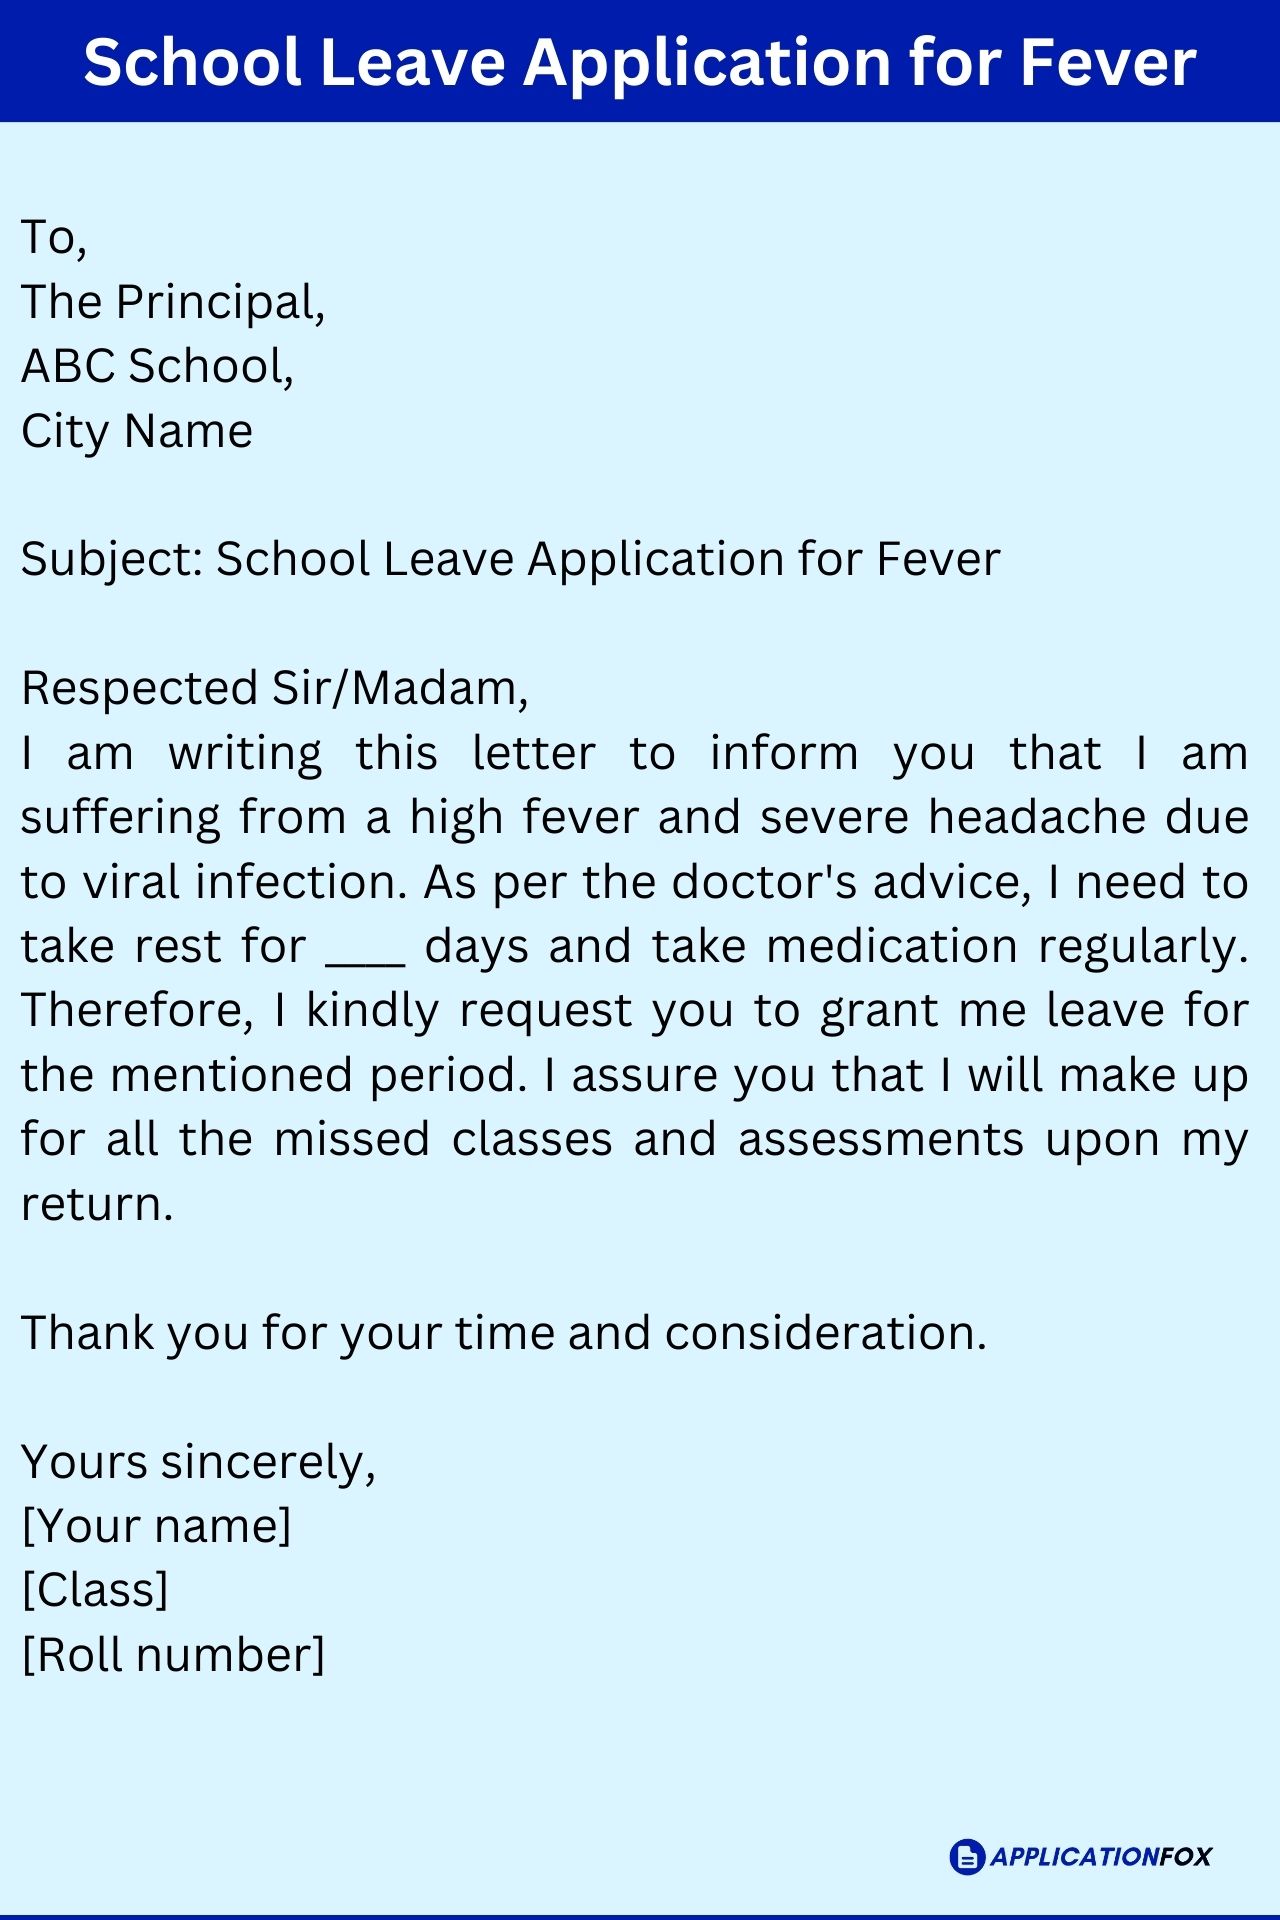 school application letter due to fever